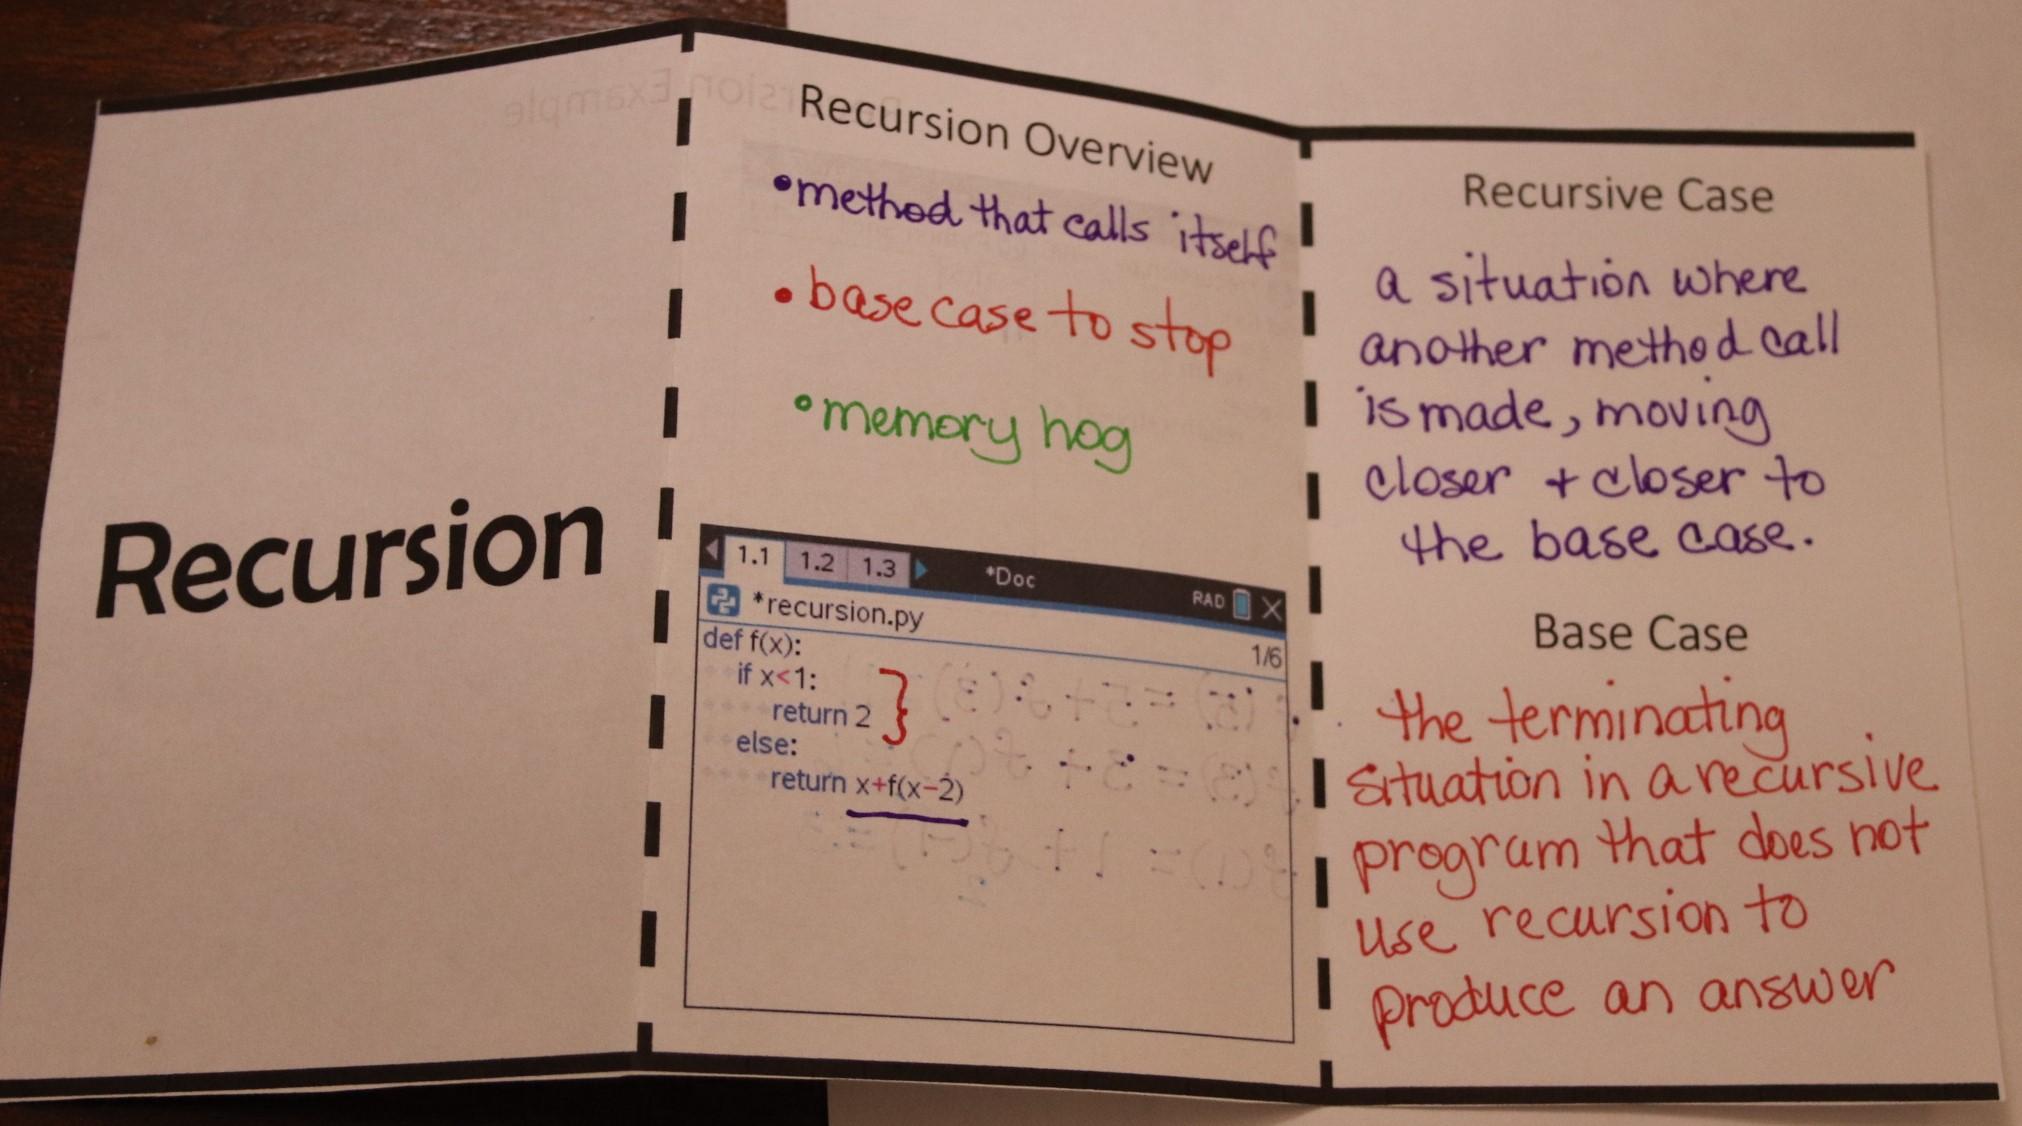 Recursion notes page inside